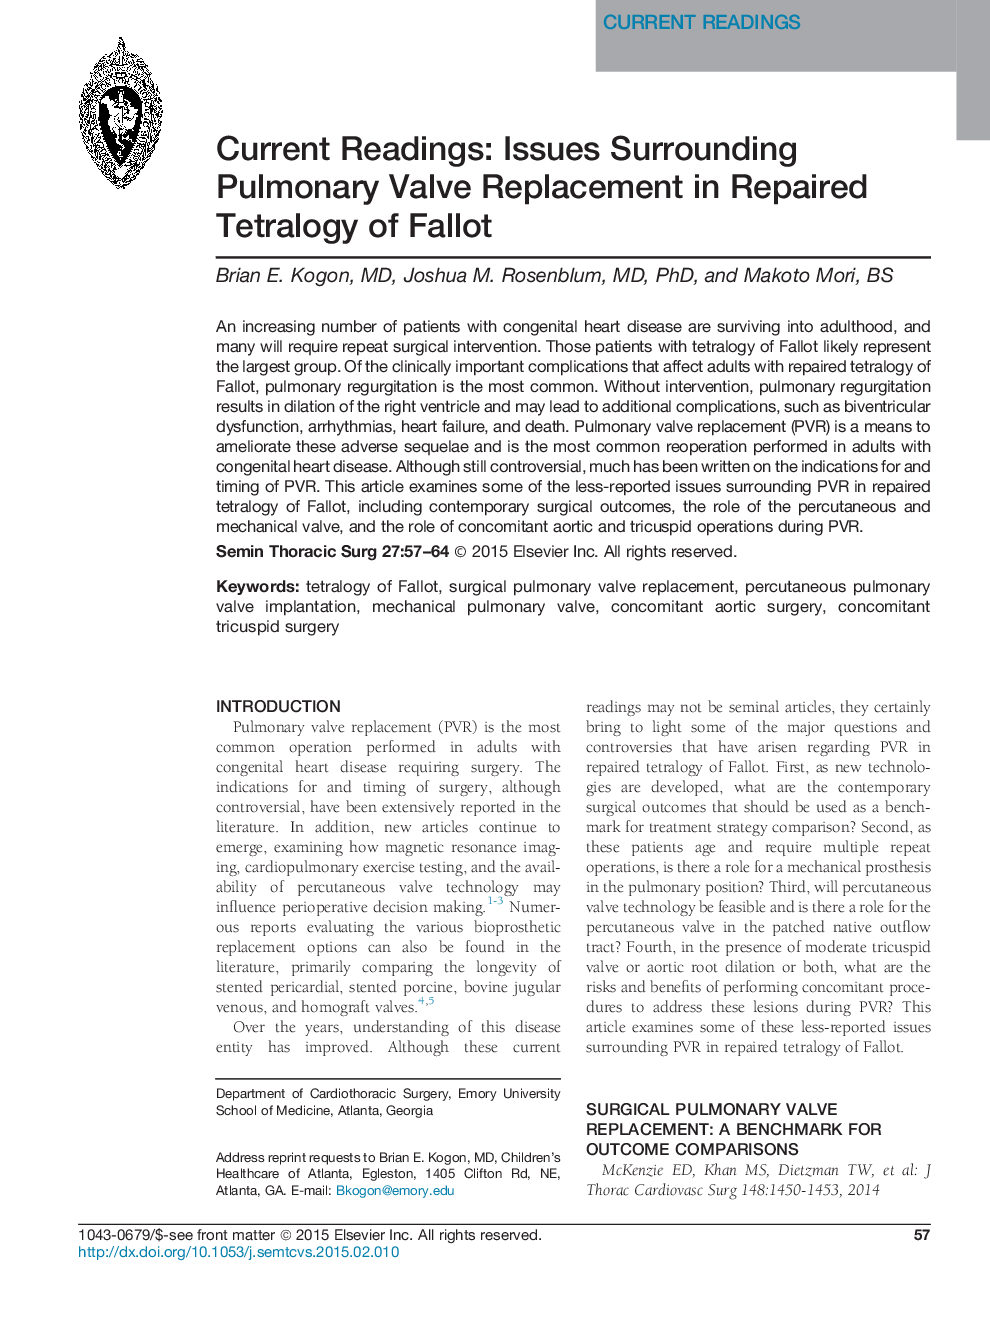 Current Readings: Issues Surrounding Pulmonary Valve Replacement in Repaired Tetralogy of Fallot